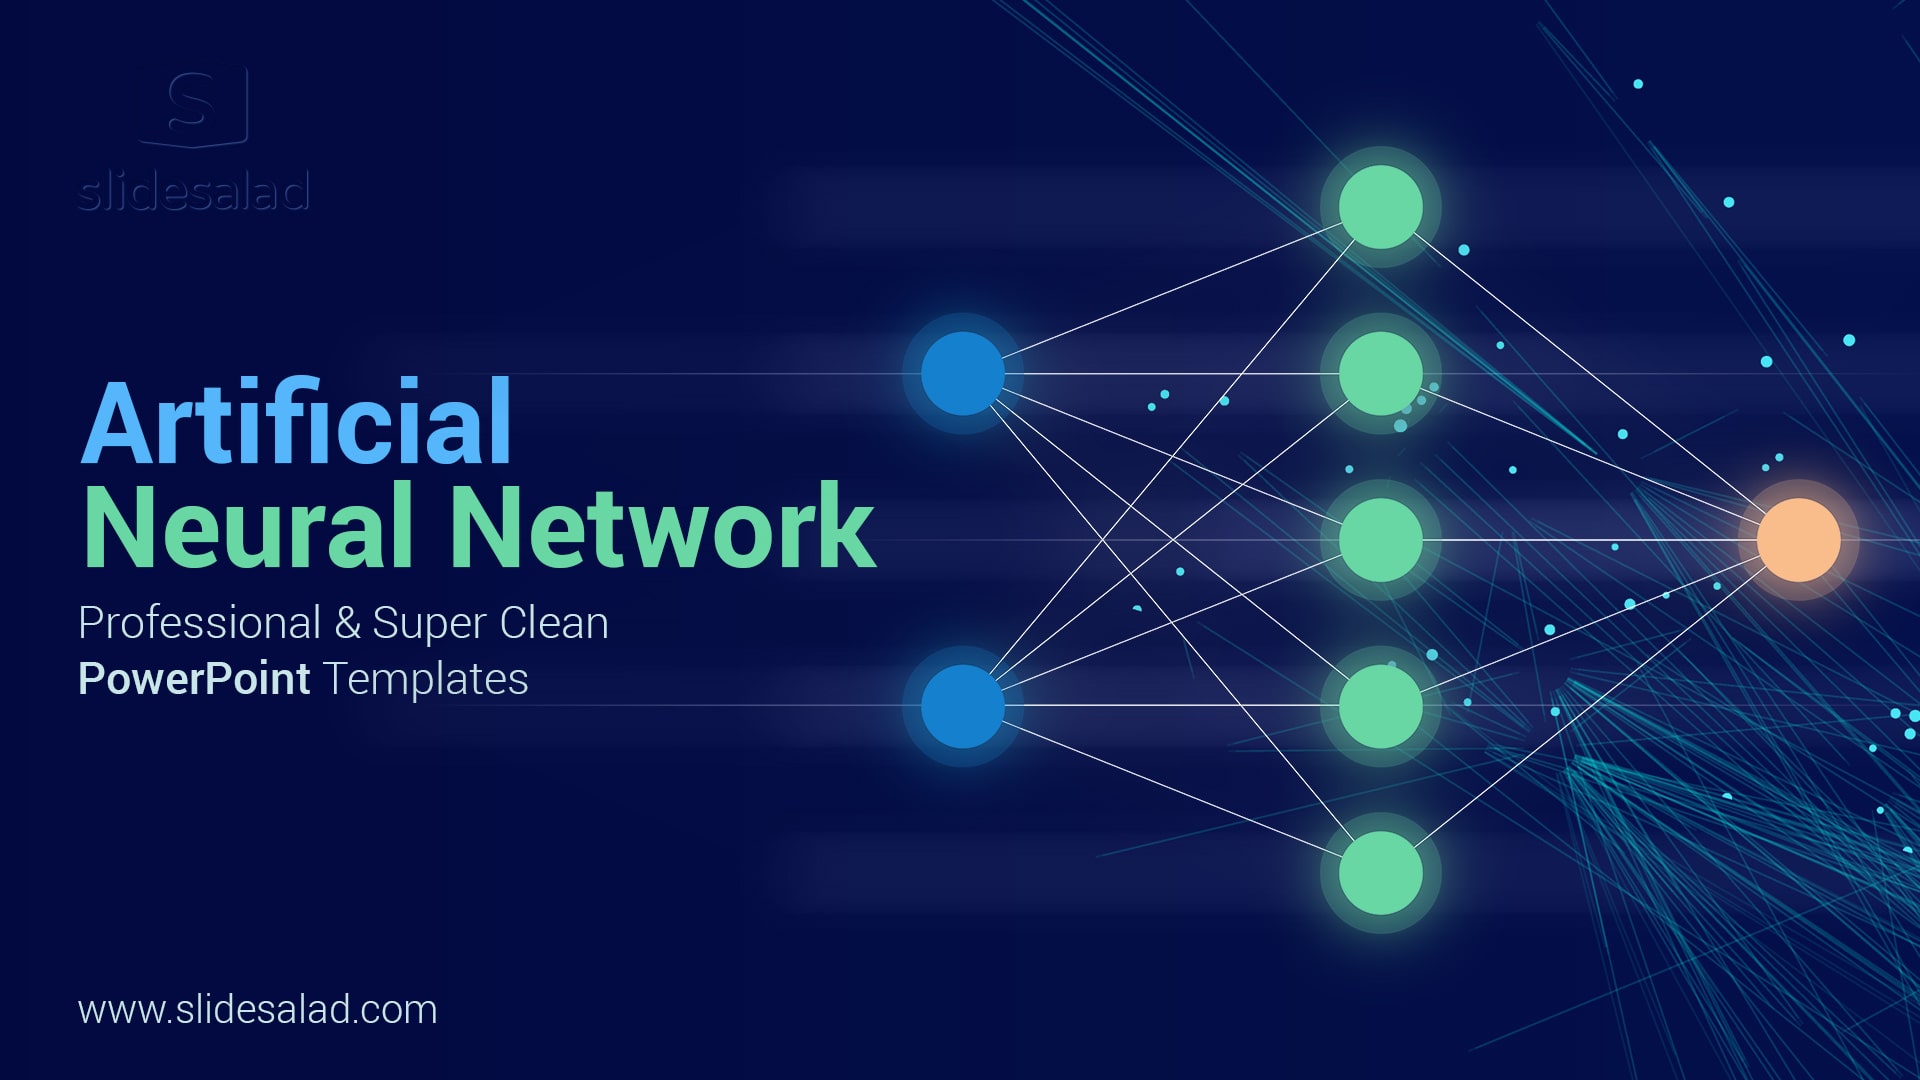 Artificial Neural Network (ANN) PowerPoint Template Designs - Awesome PPT Slide Layouts About Algorithms That Are Modeled After the Human Brain